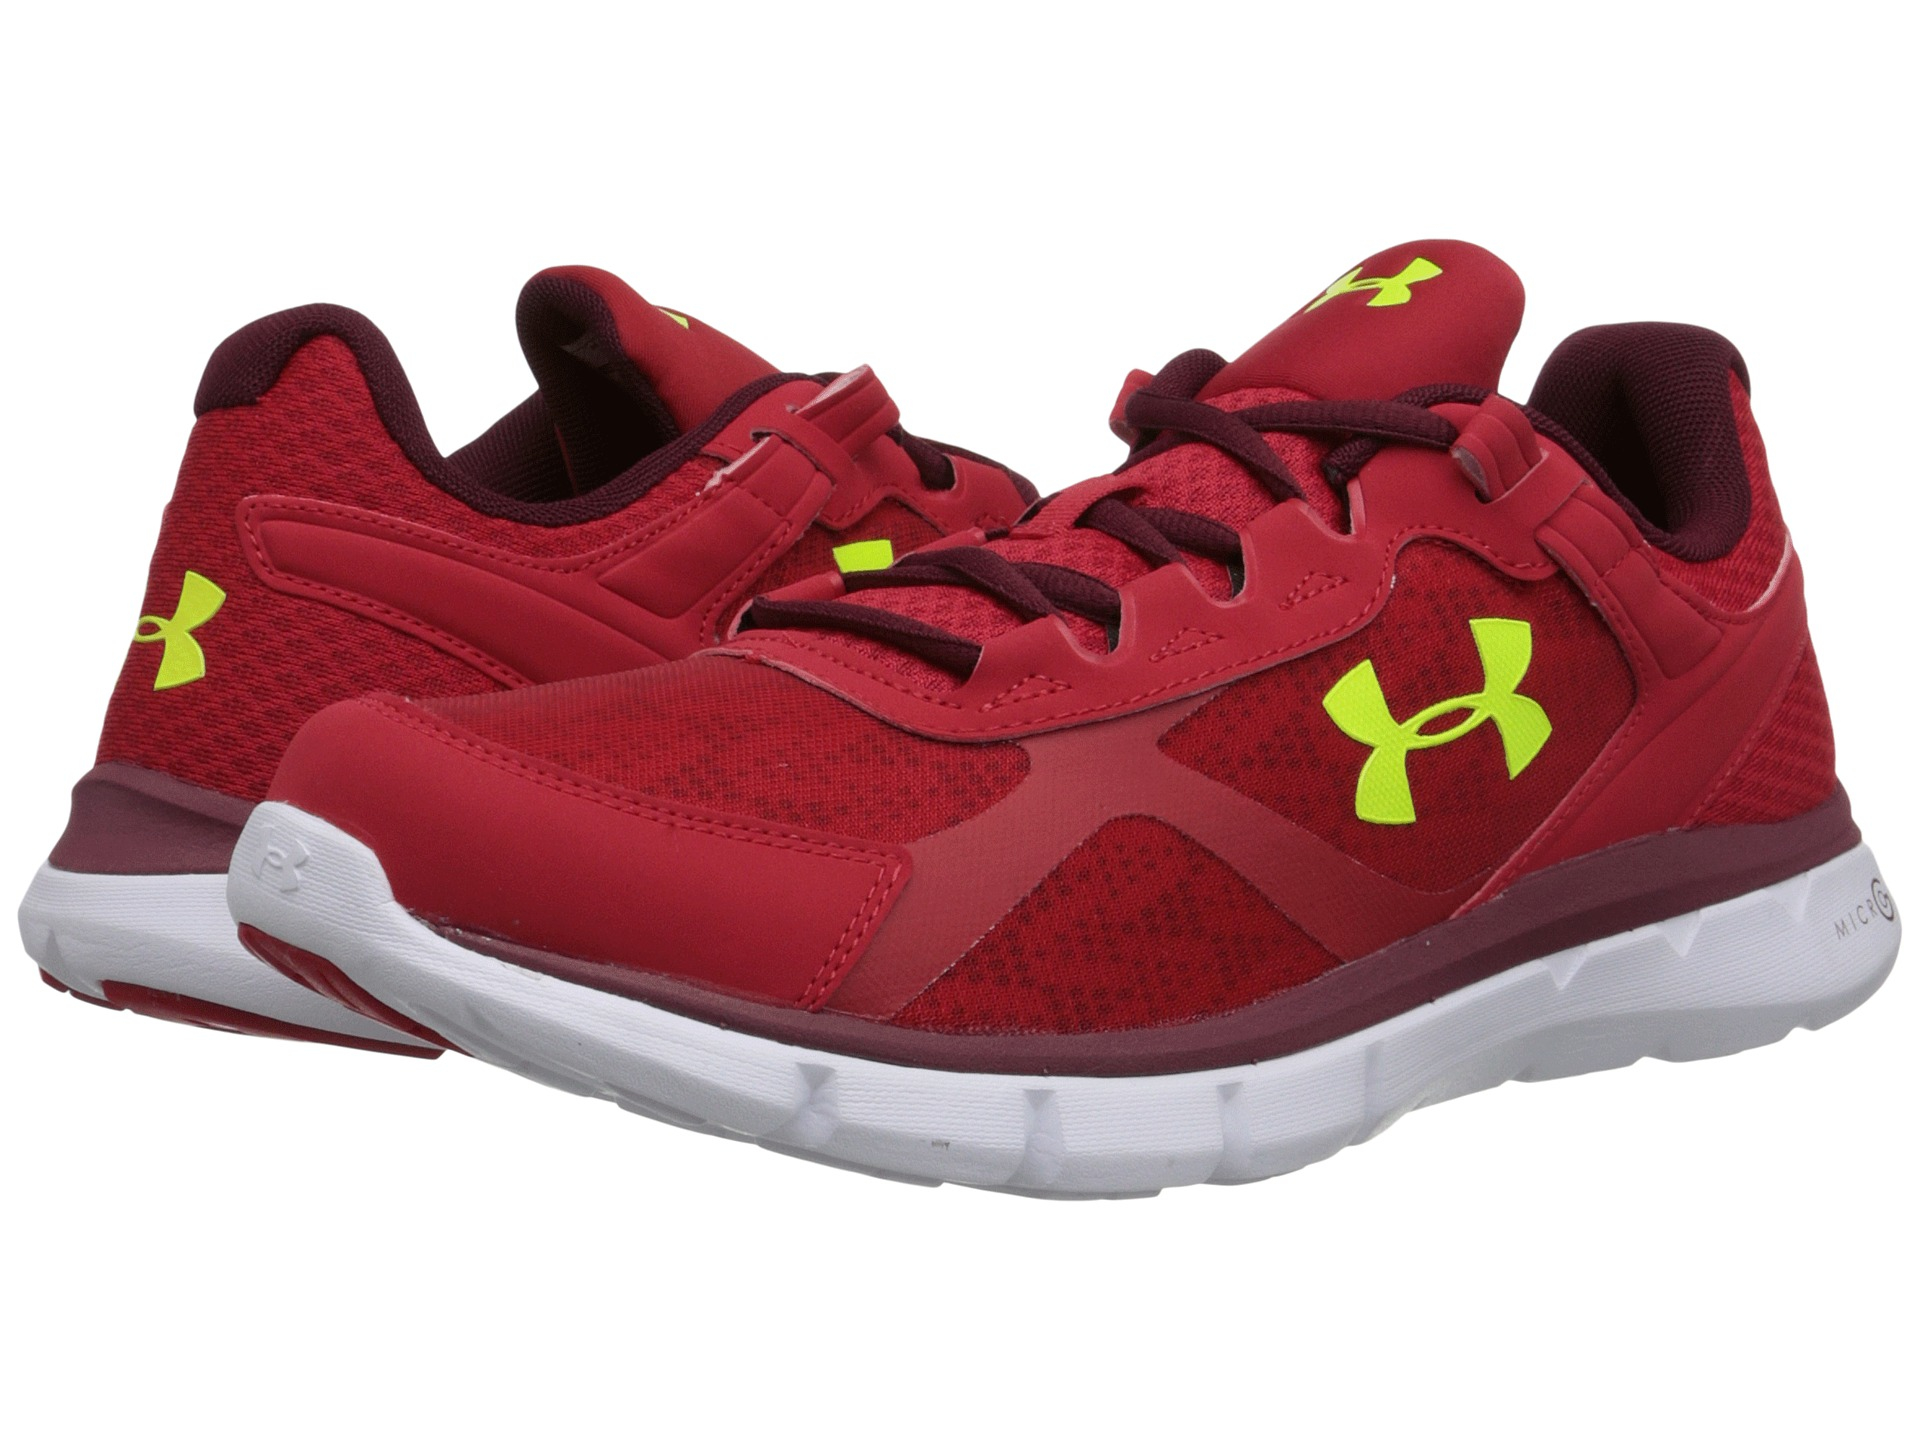 Under Armour Ua Micro G™ Velocity Rn in Red for Men - Lyst